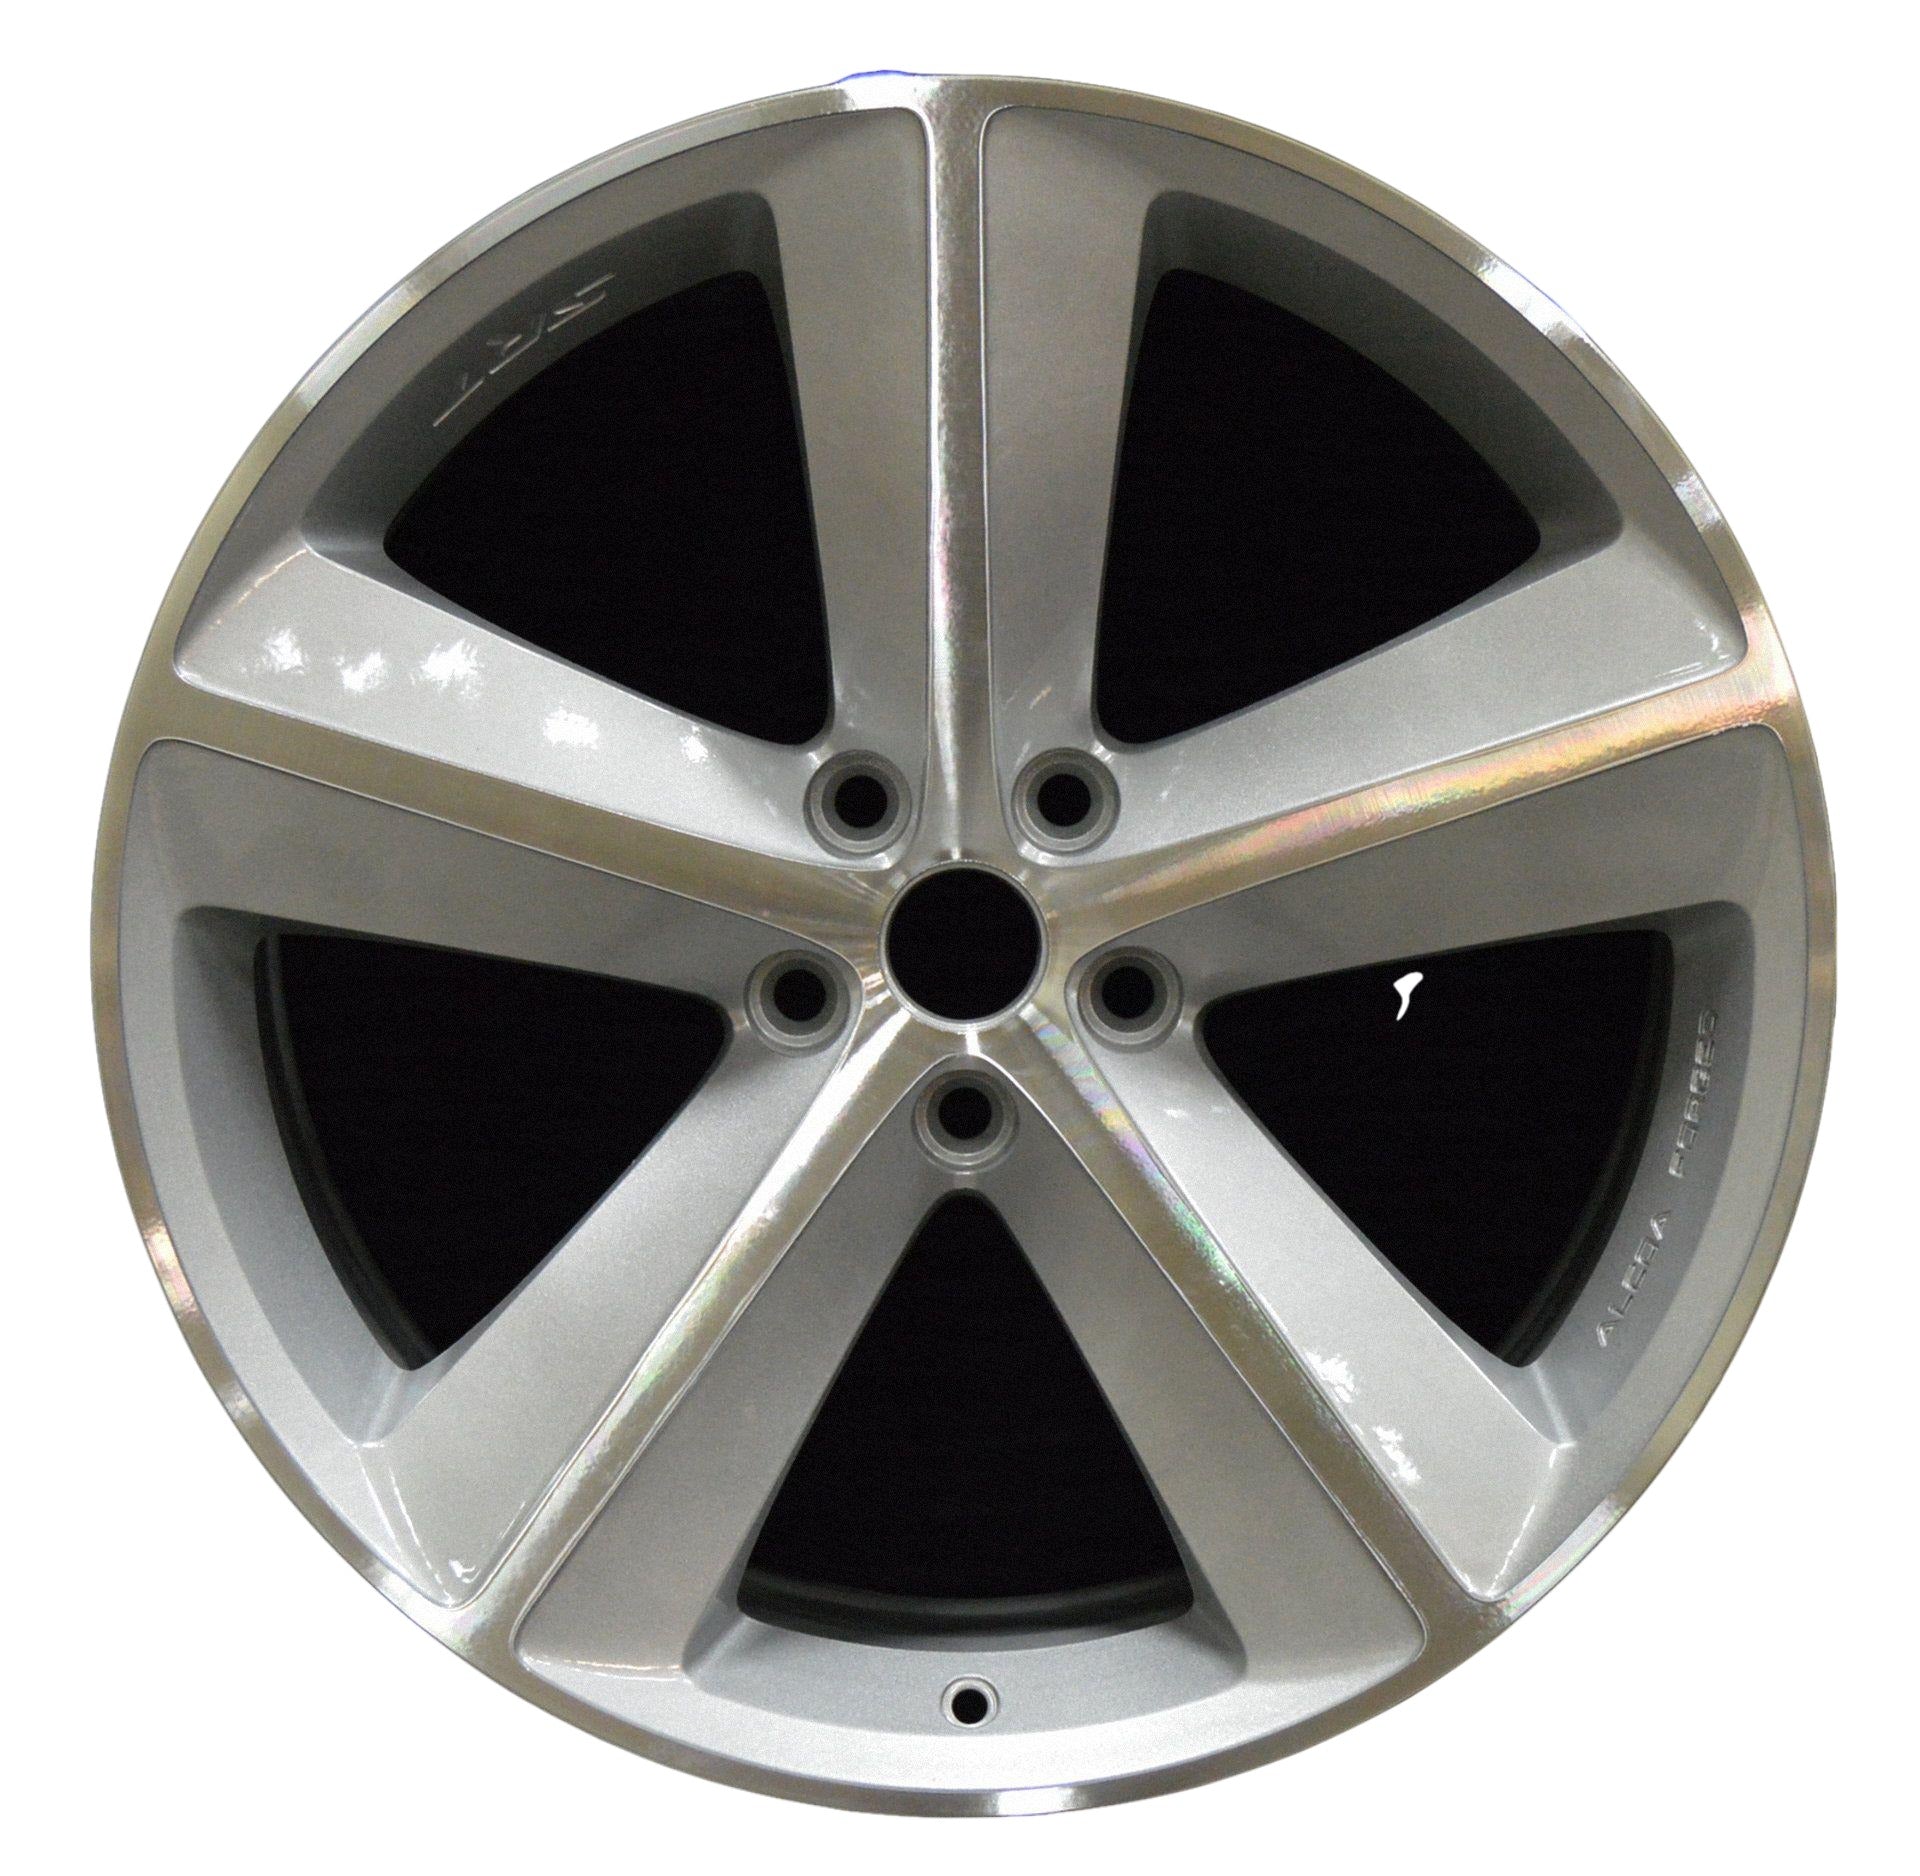 Dodge Challenger  2008, 2009, 2010, 2011, 2012, 2013, 2014 Factory OEM Car Wheel Size 20x9 Alloy WAO.2357.PS02.MA